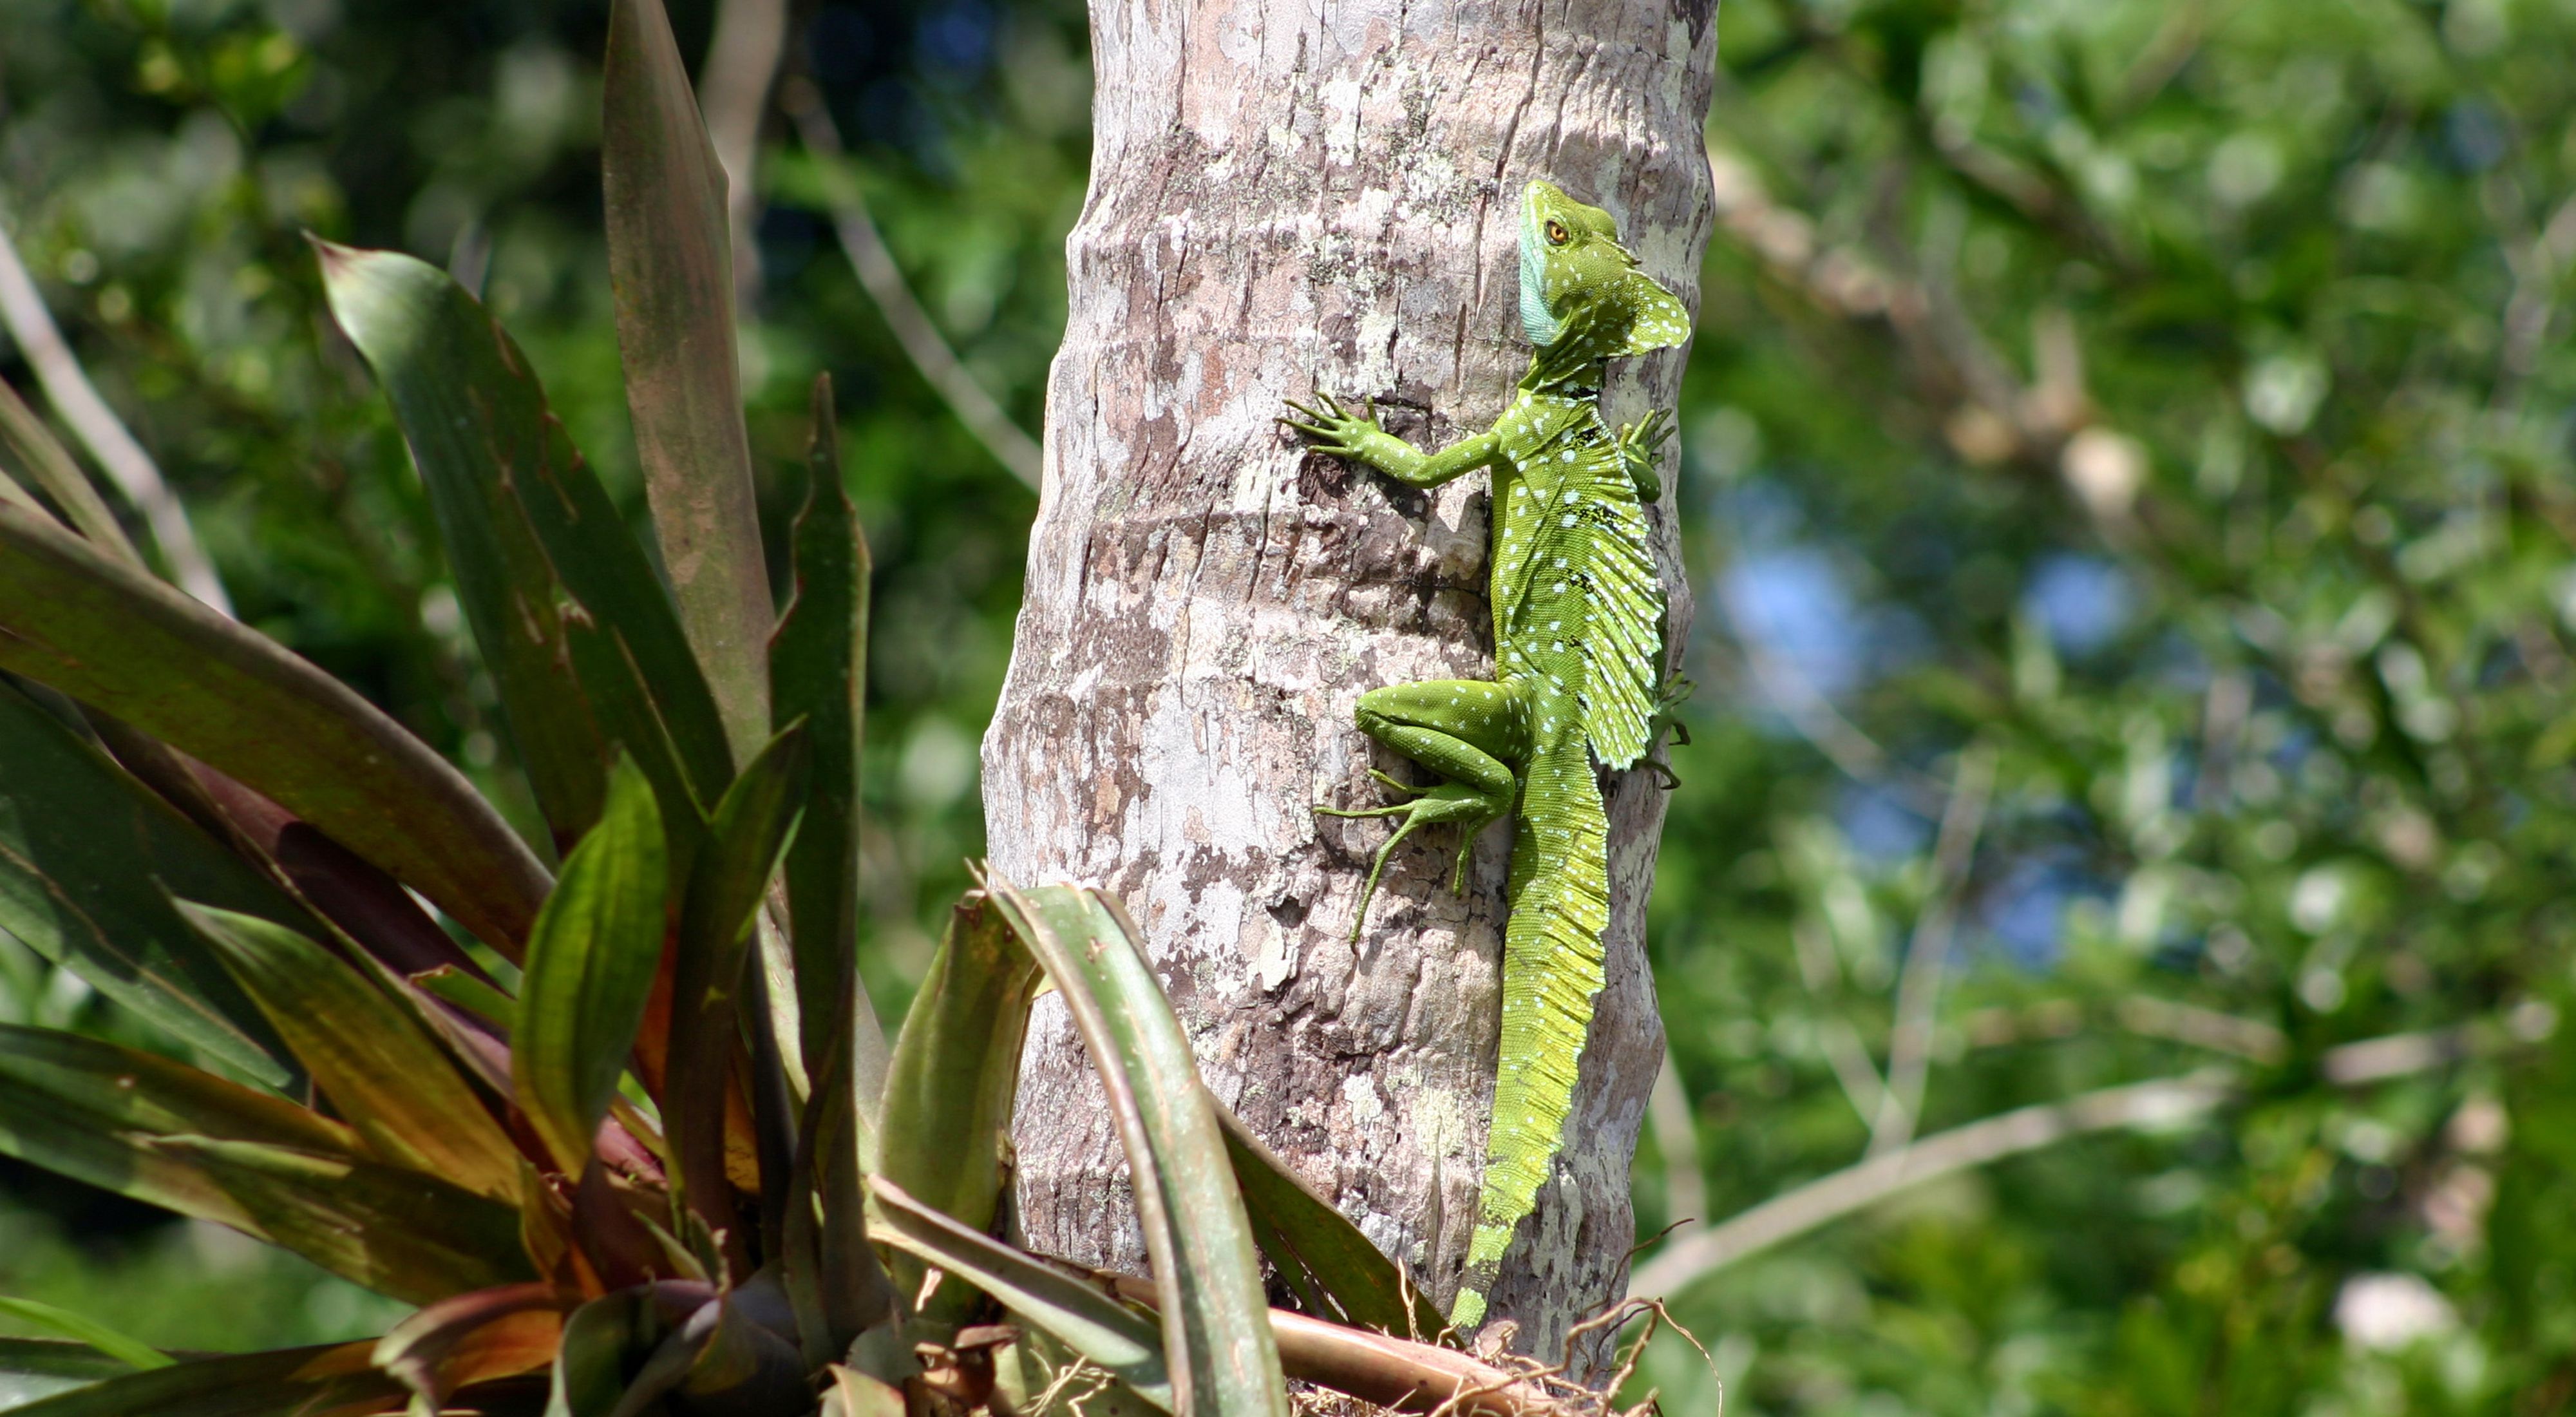 A reptile on a tree trunk.